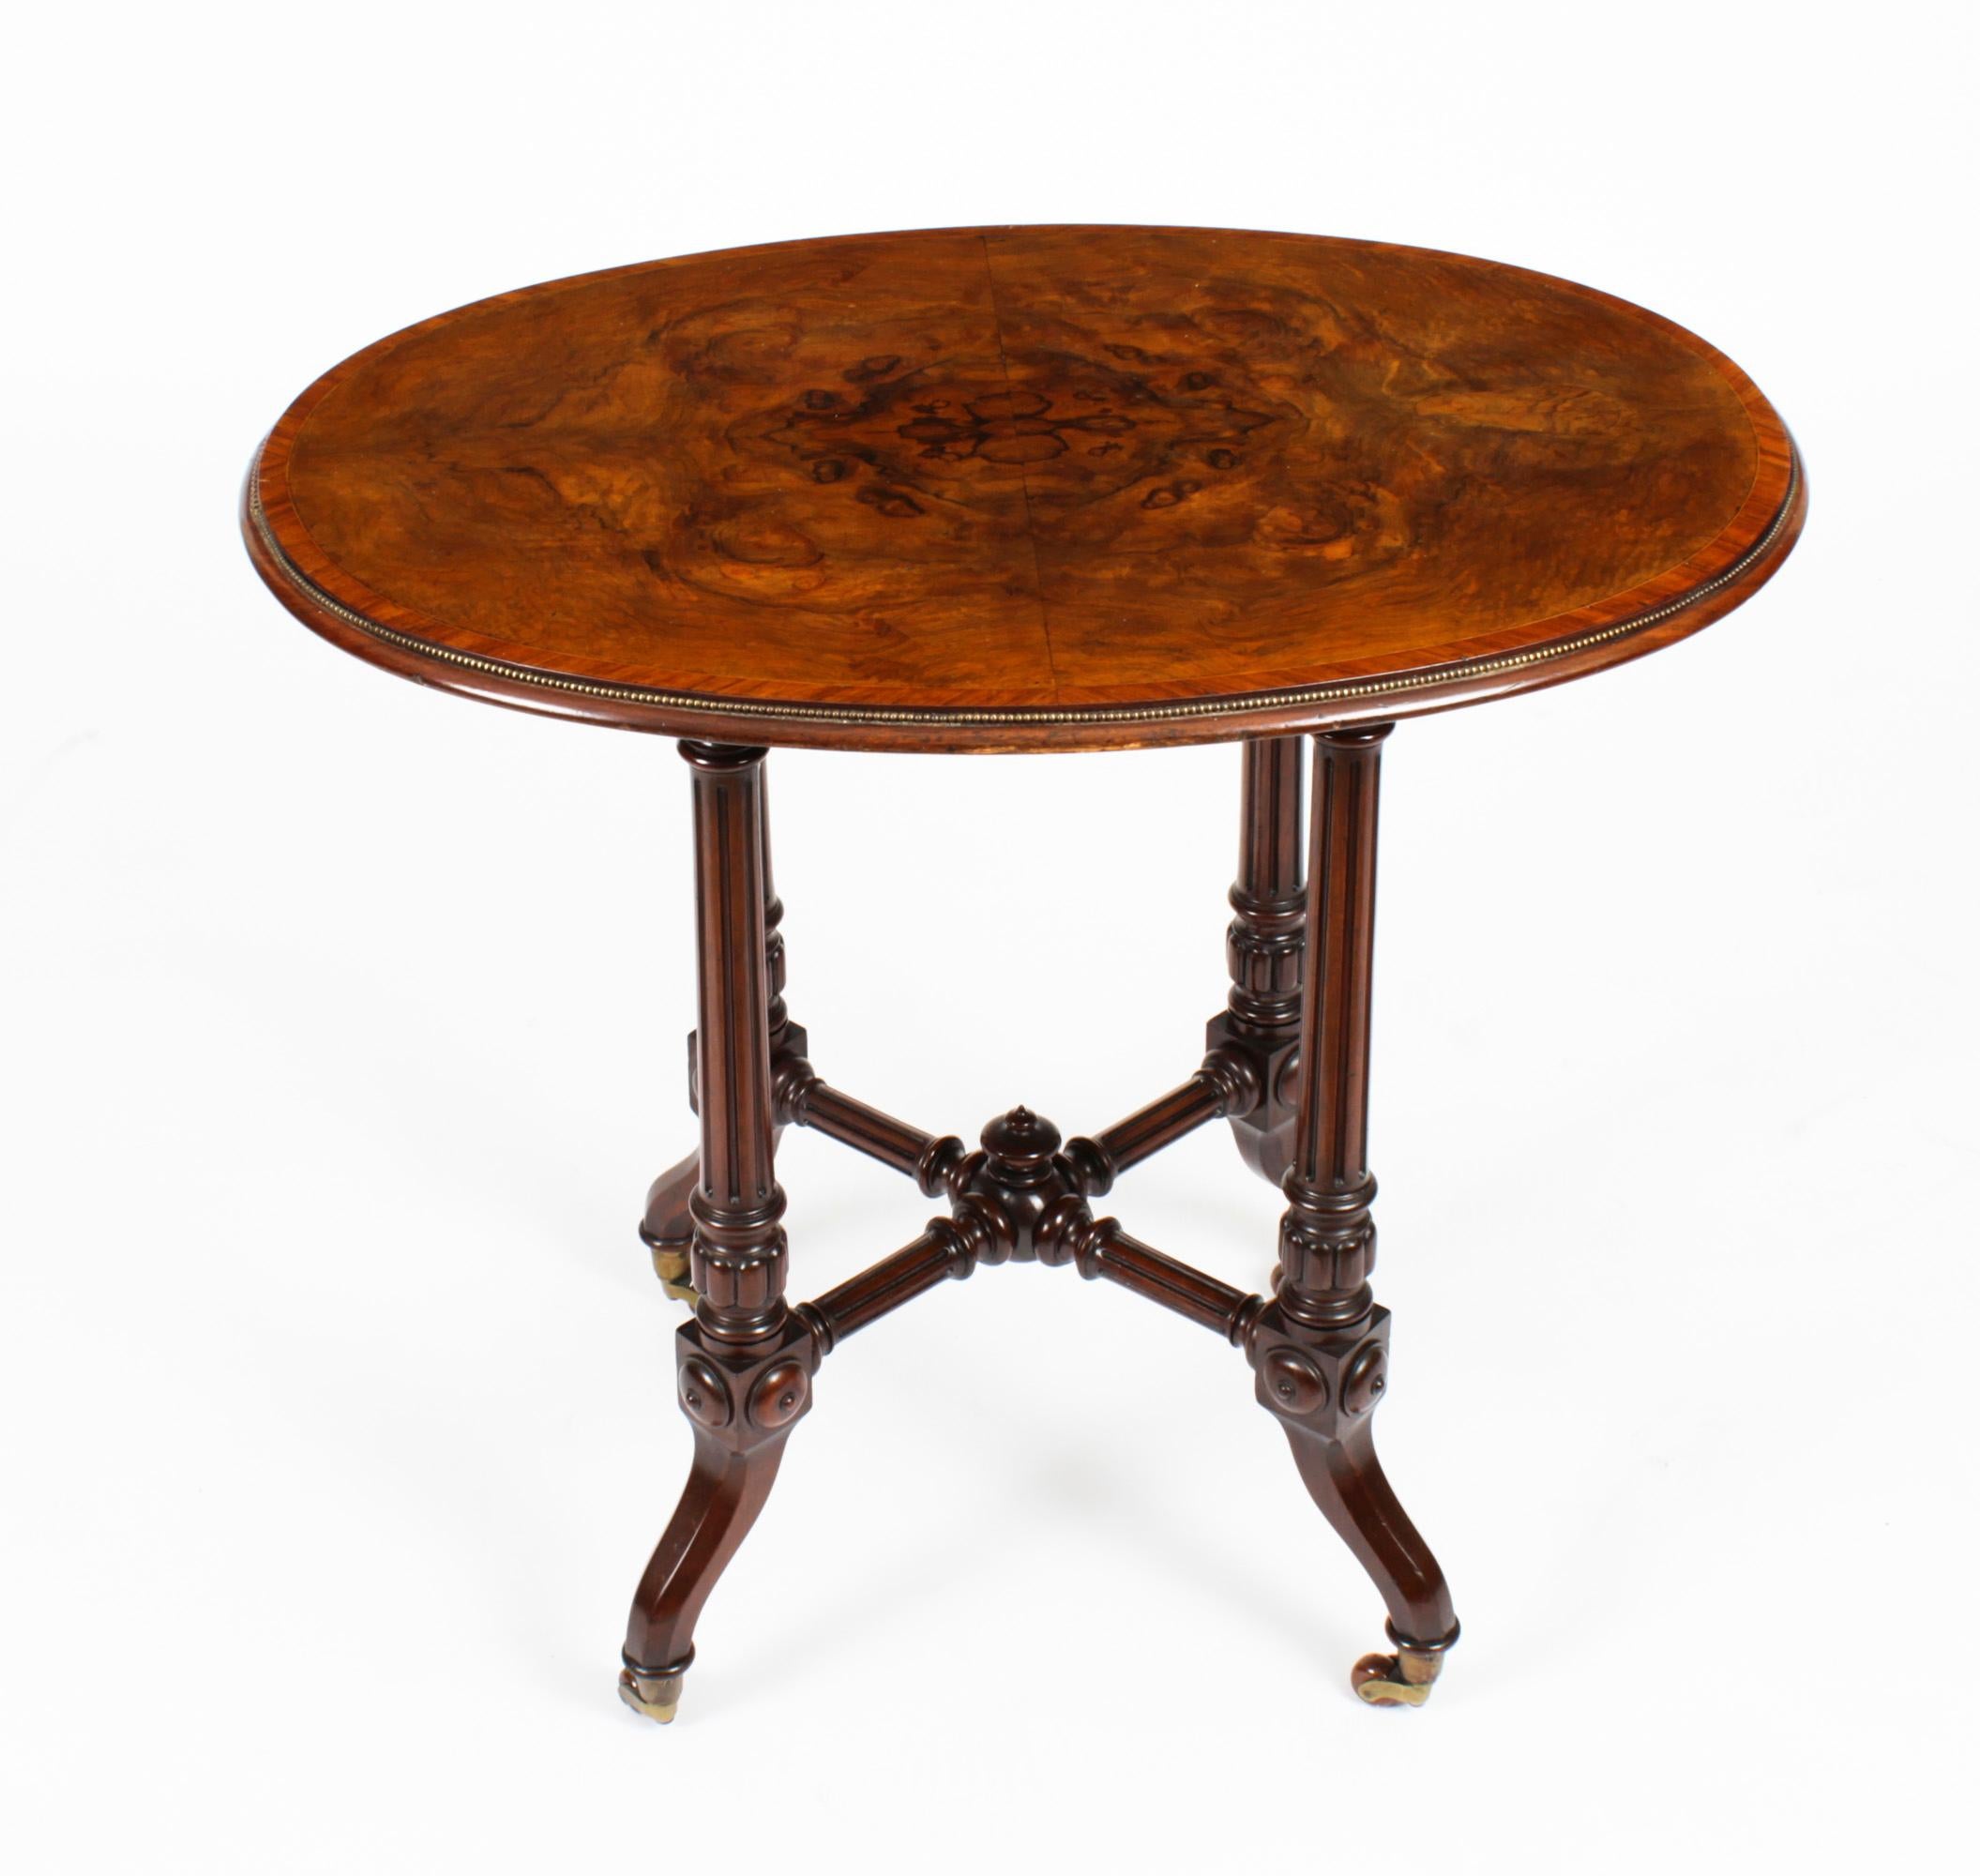 This elegantly proportioned antique Victorian burr walnut occasional table dates from circa 1870.
 
This table has been masterfully crafted with an oval top raised on a four carved walnut legs that terminate in their original brass and porcelain